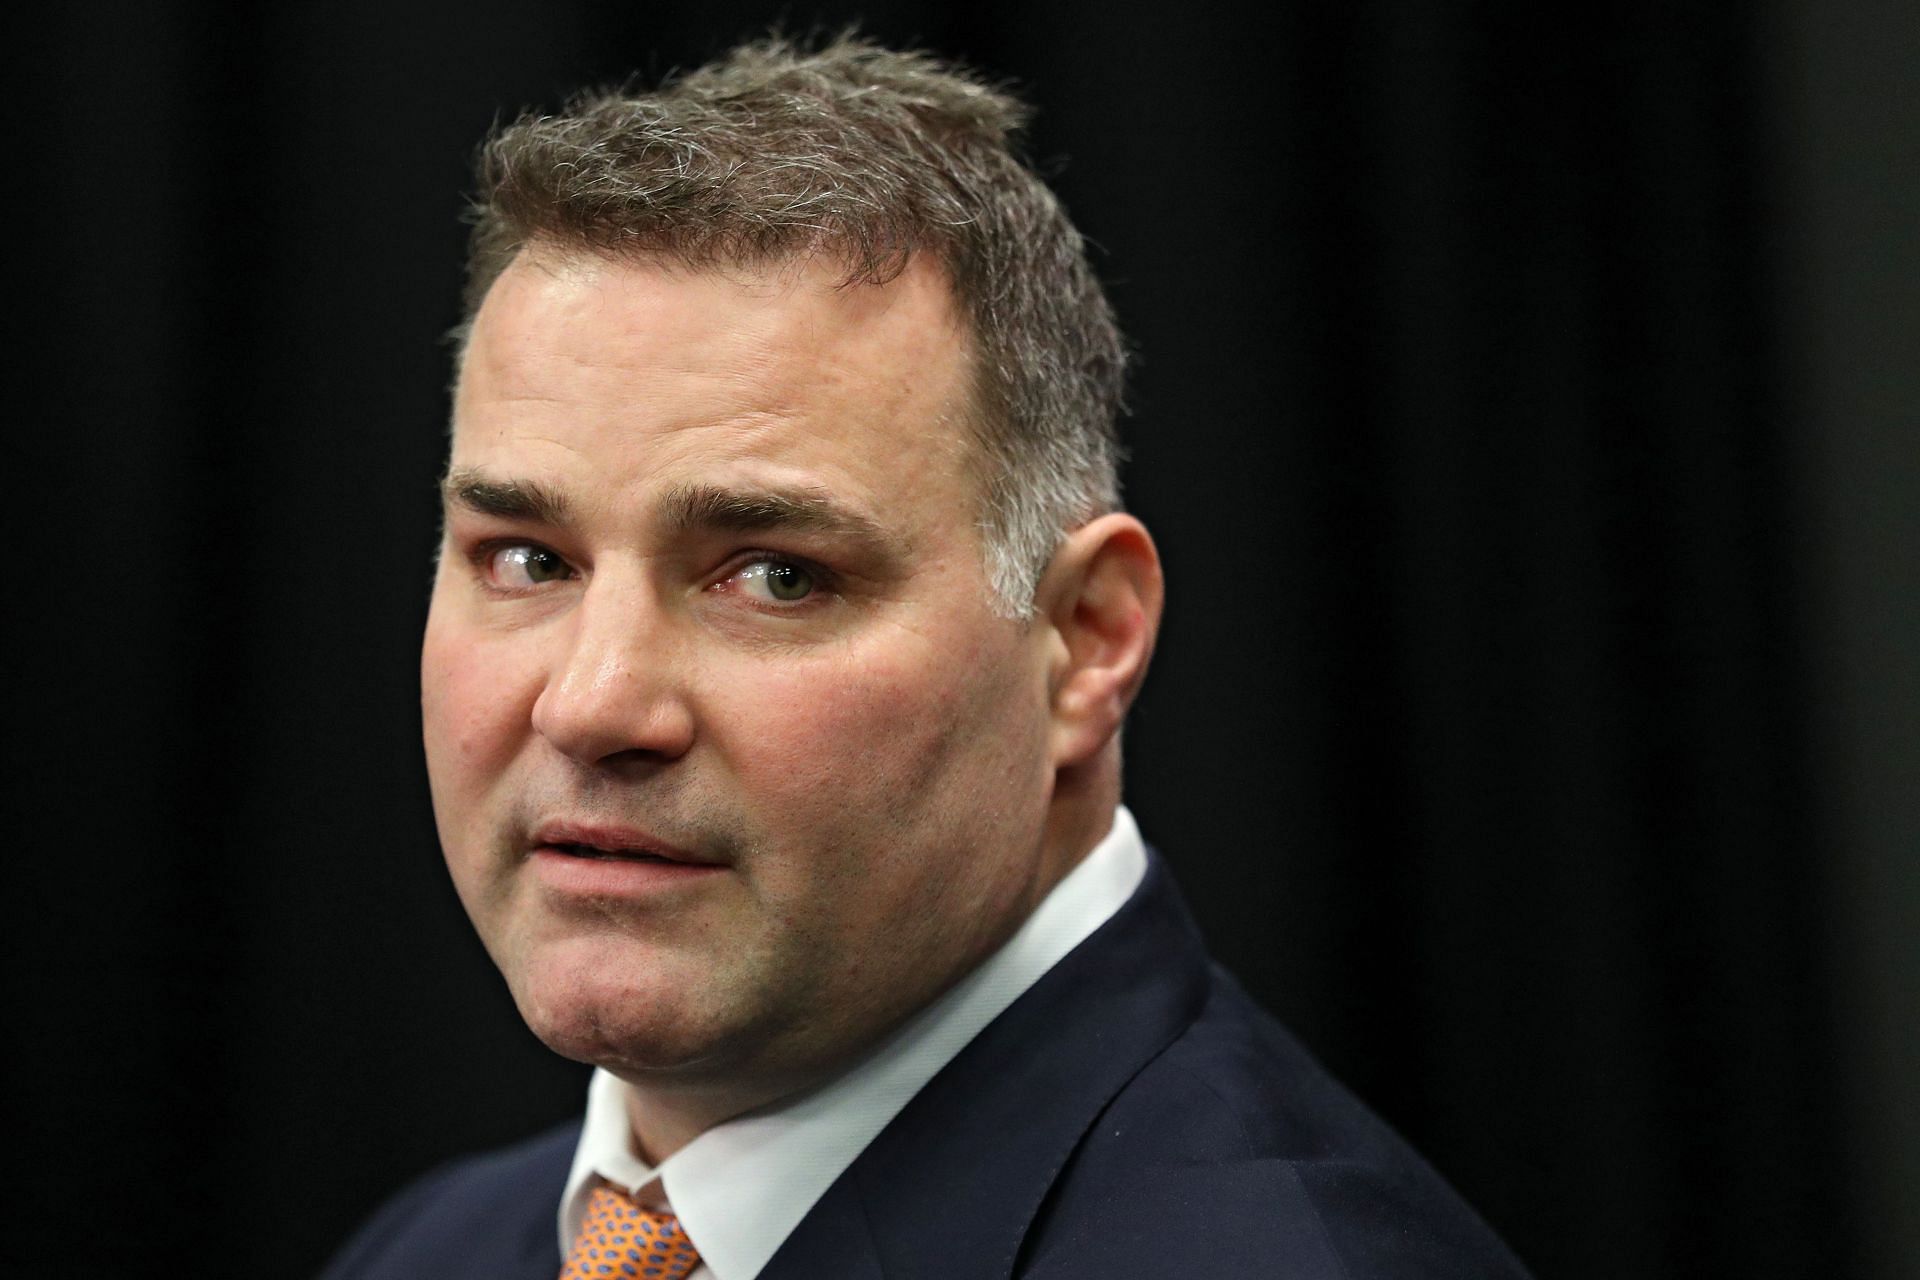 Eric Lindros, NHL Wiki